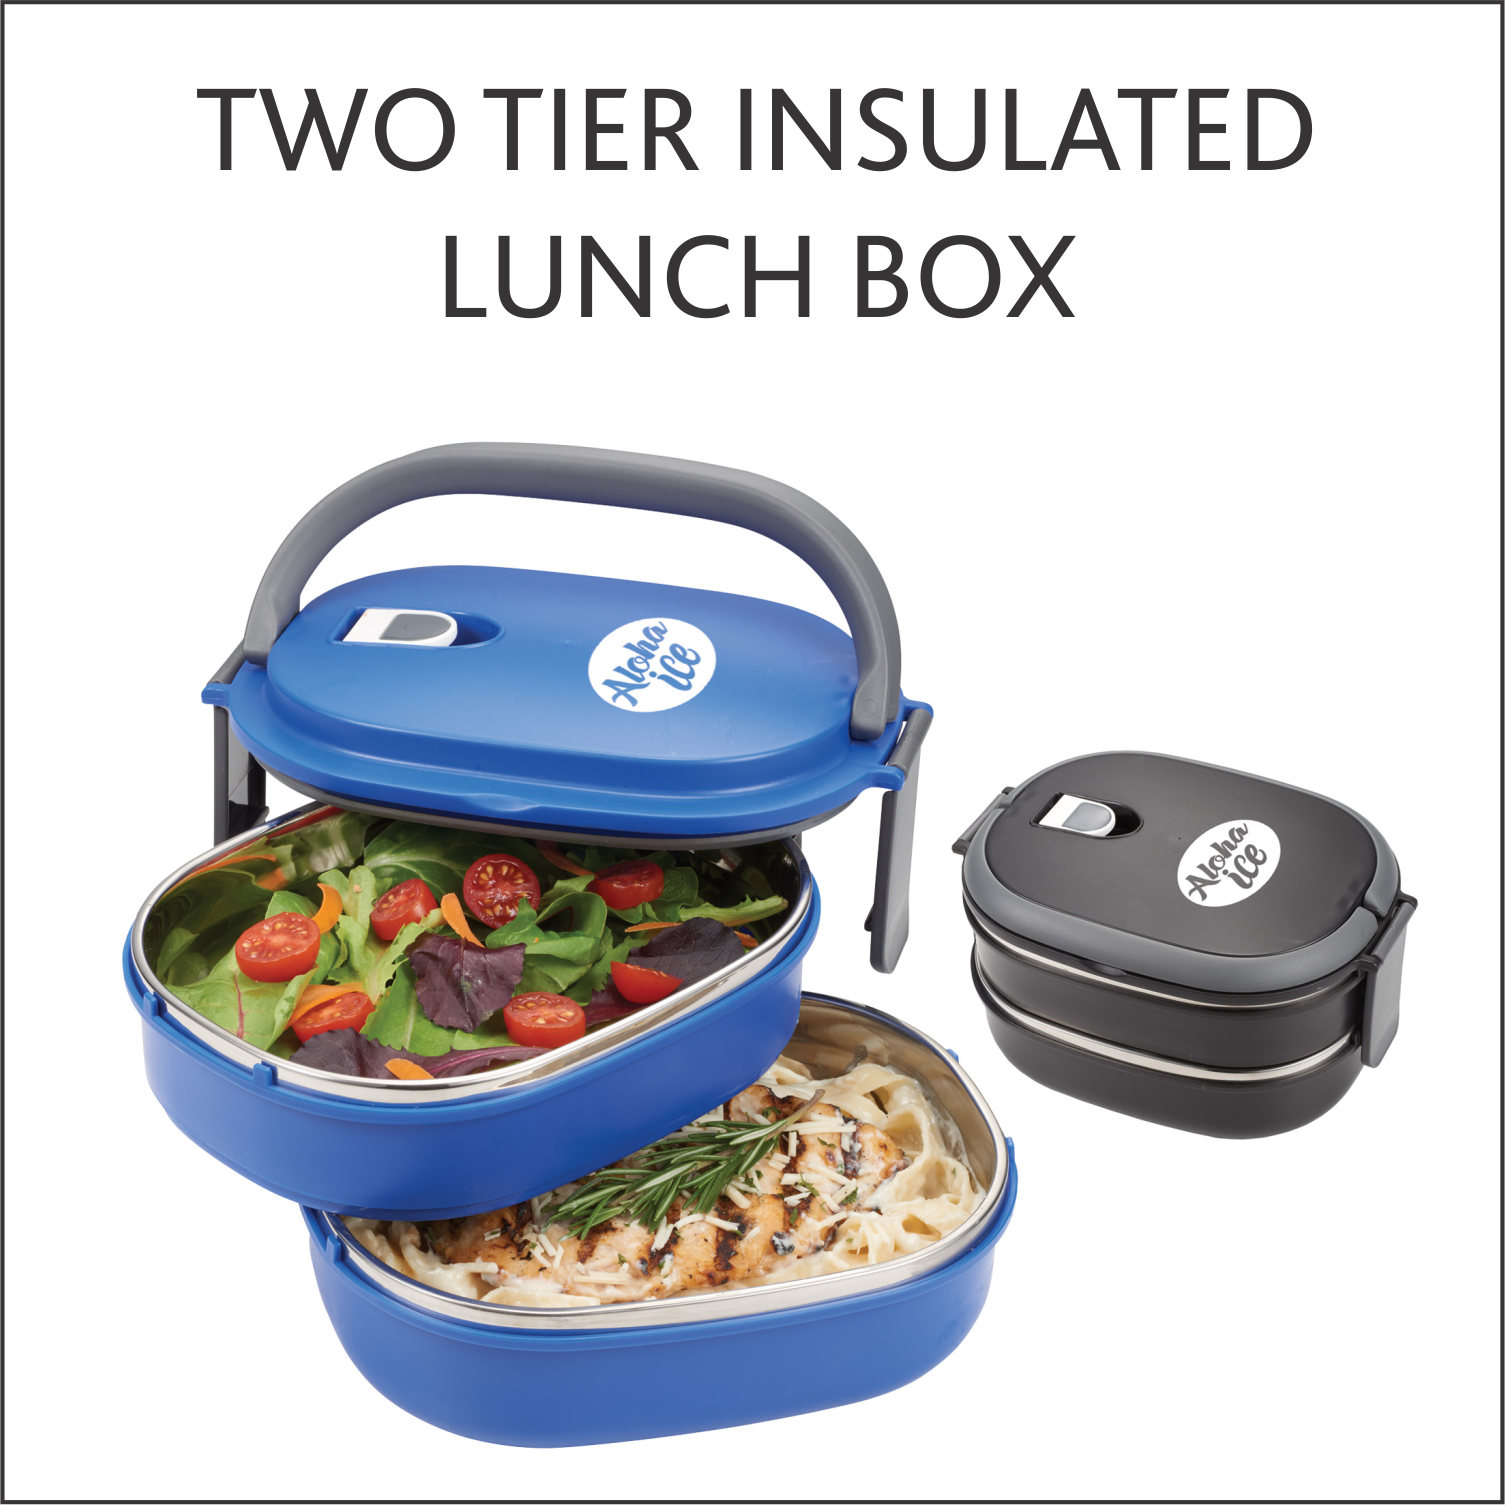 LUNCH BOX.png